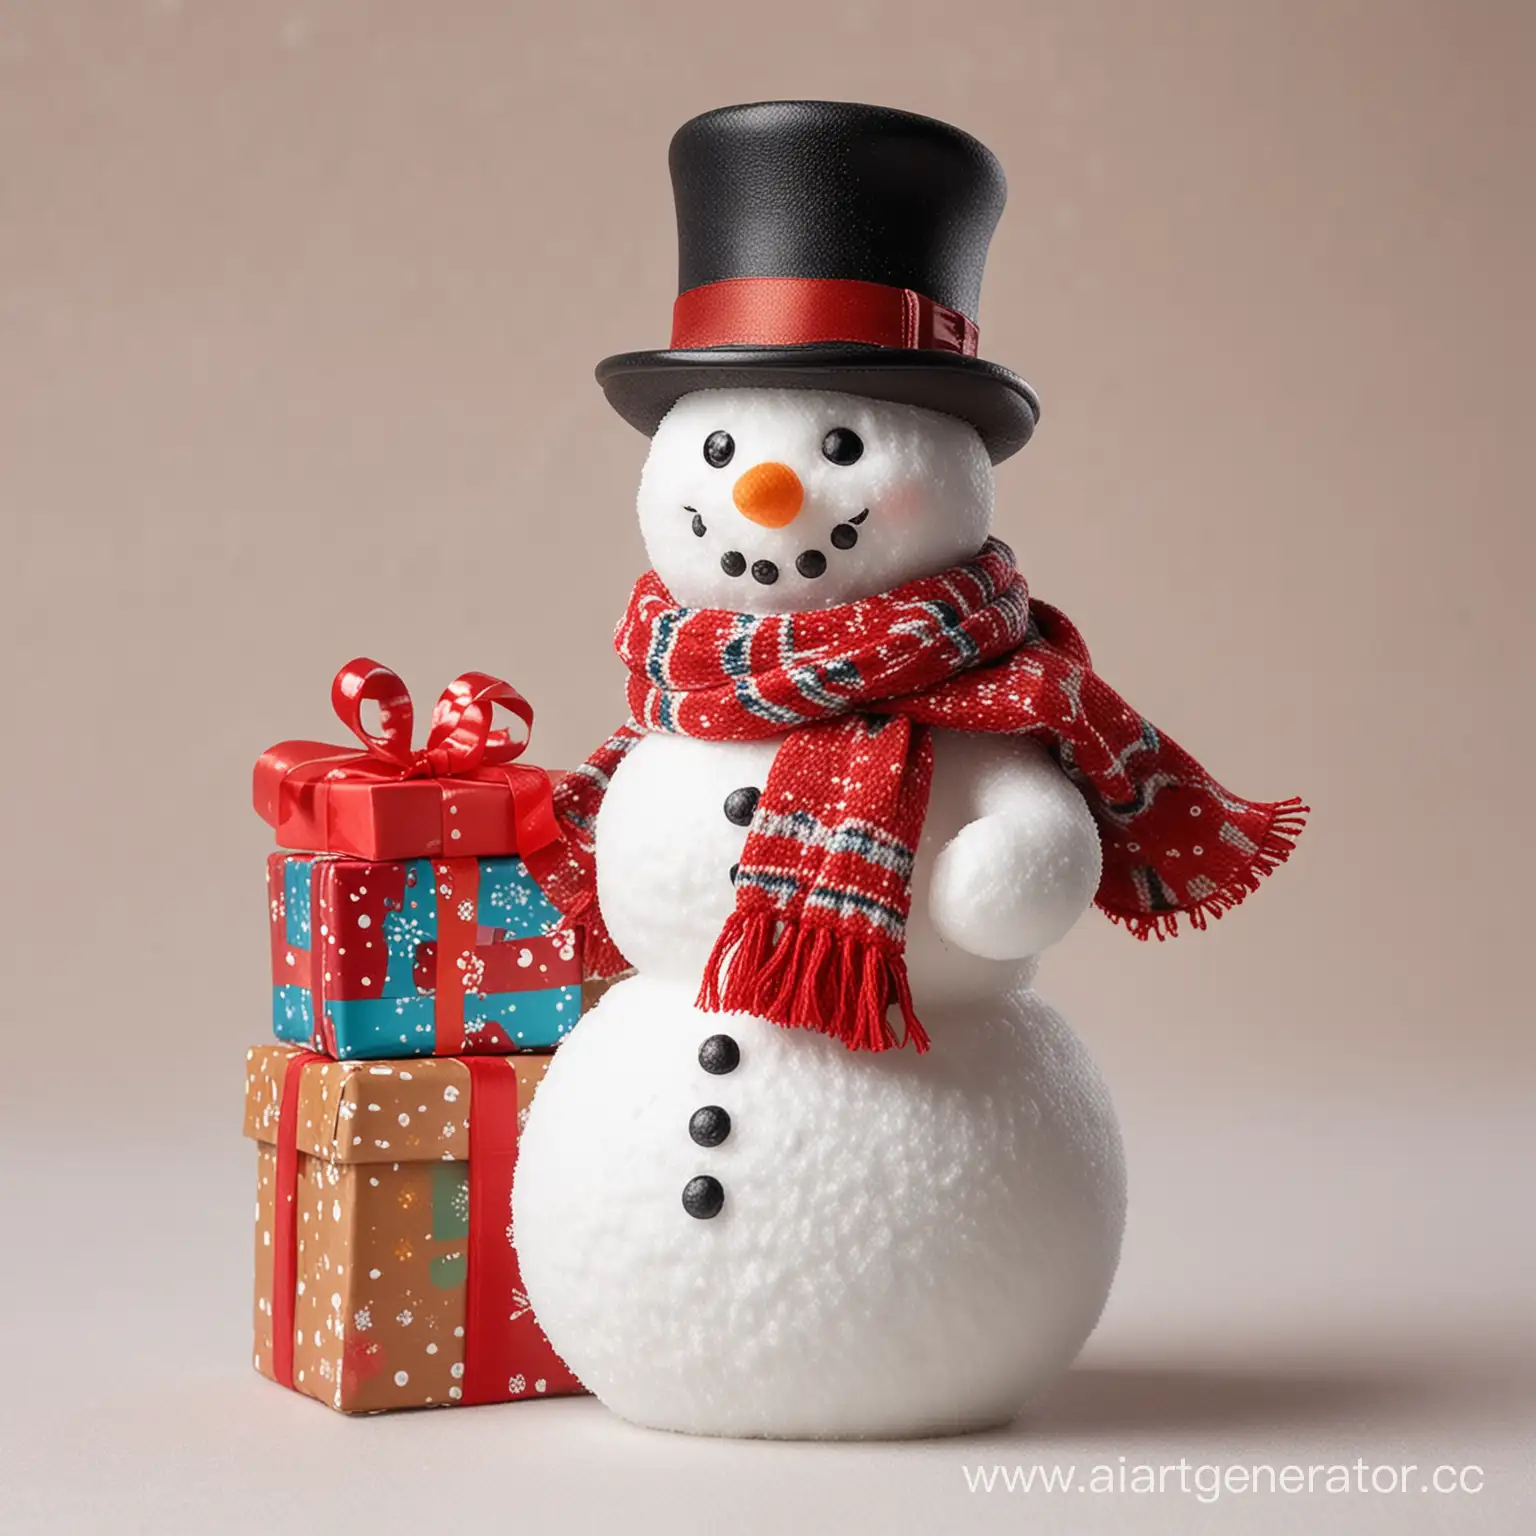 Cheerful-Snowman-Holding-Gifts-in-Winter-Scene